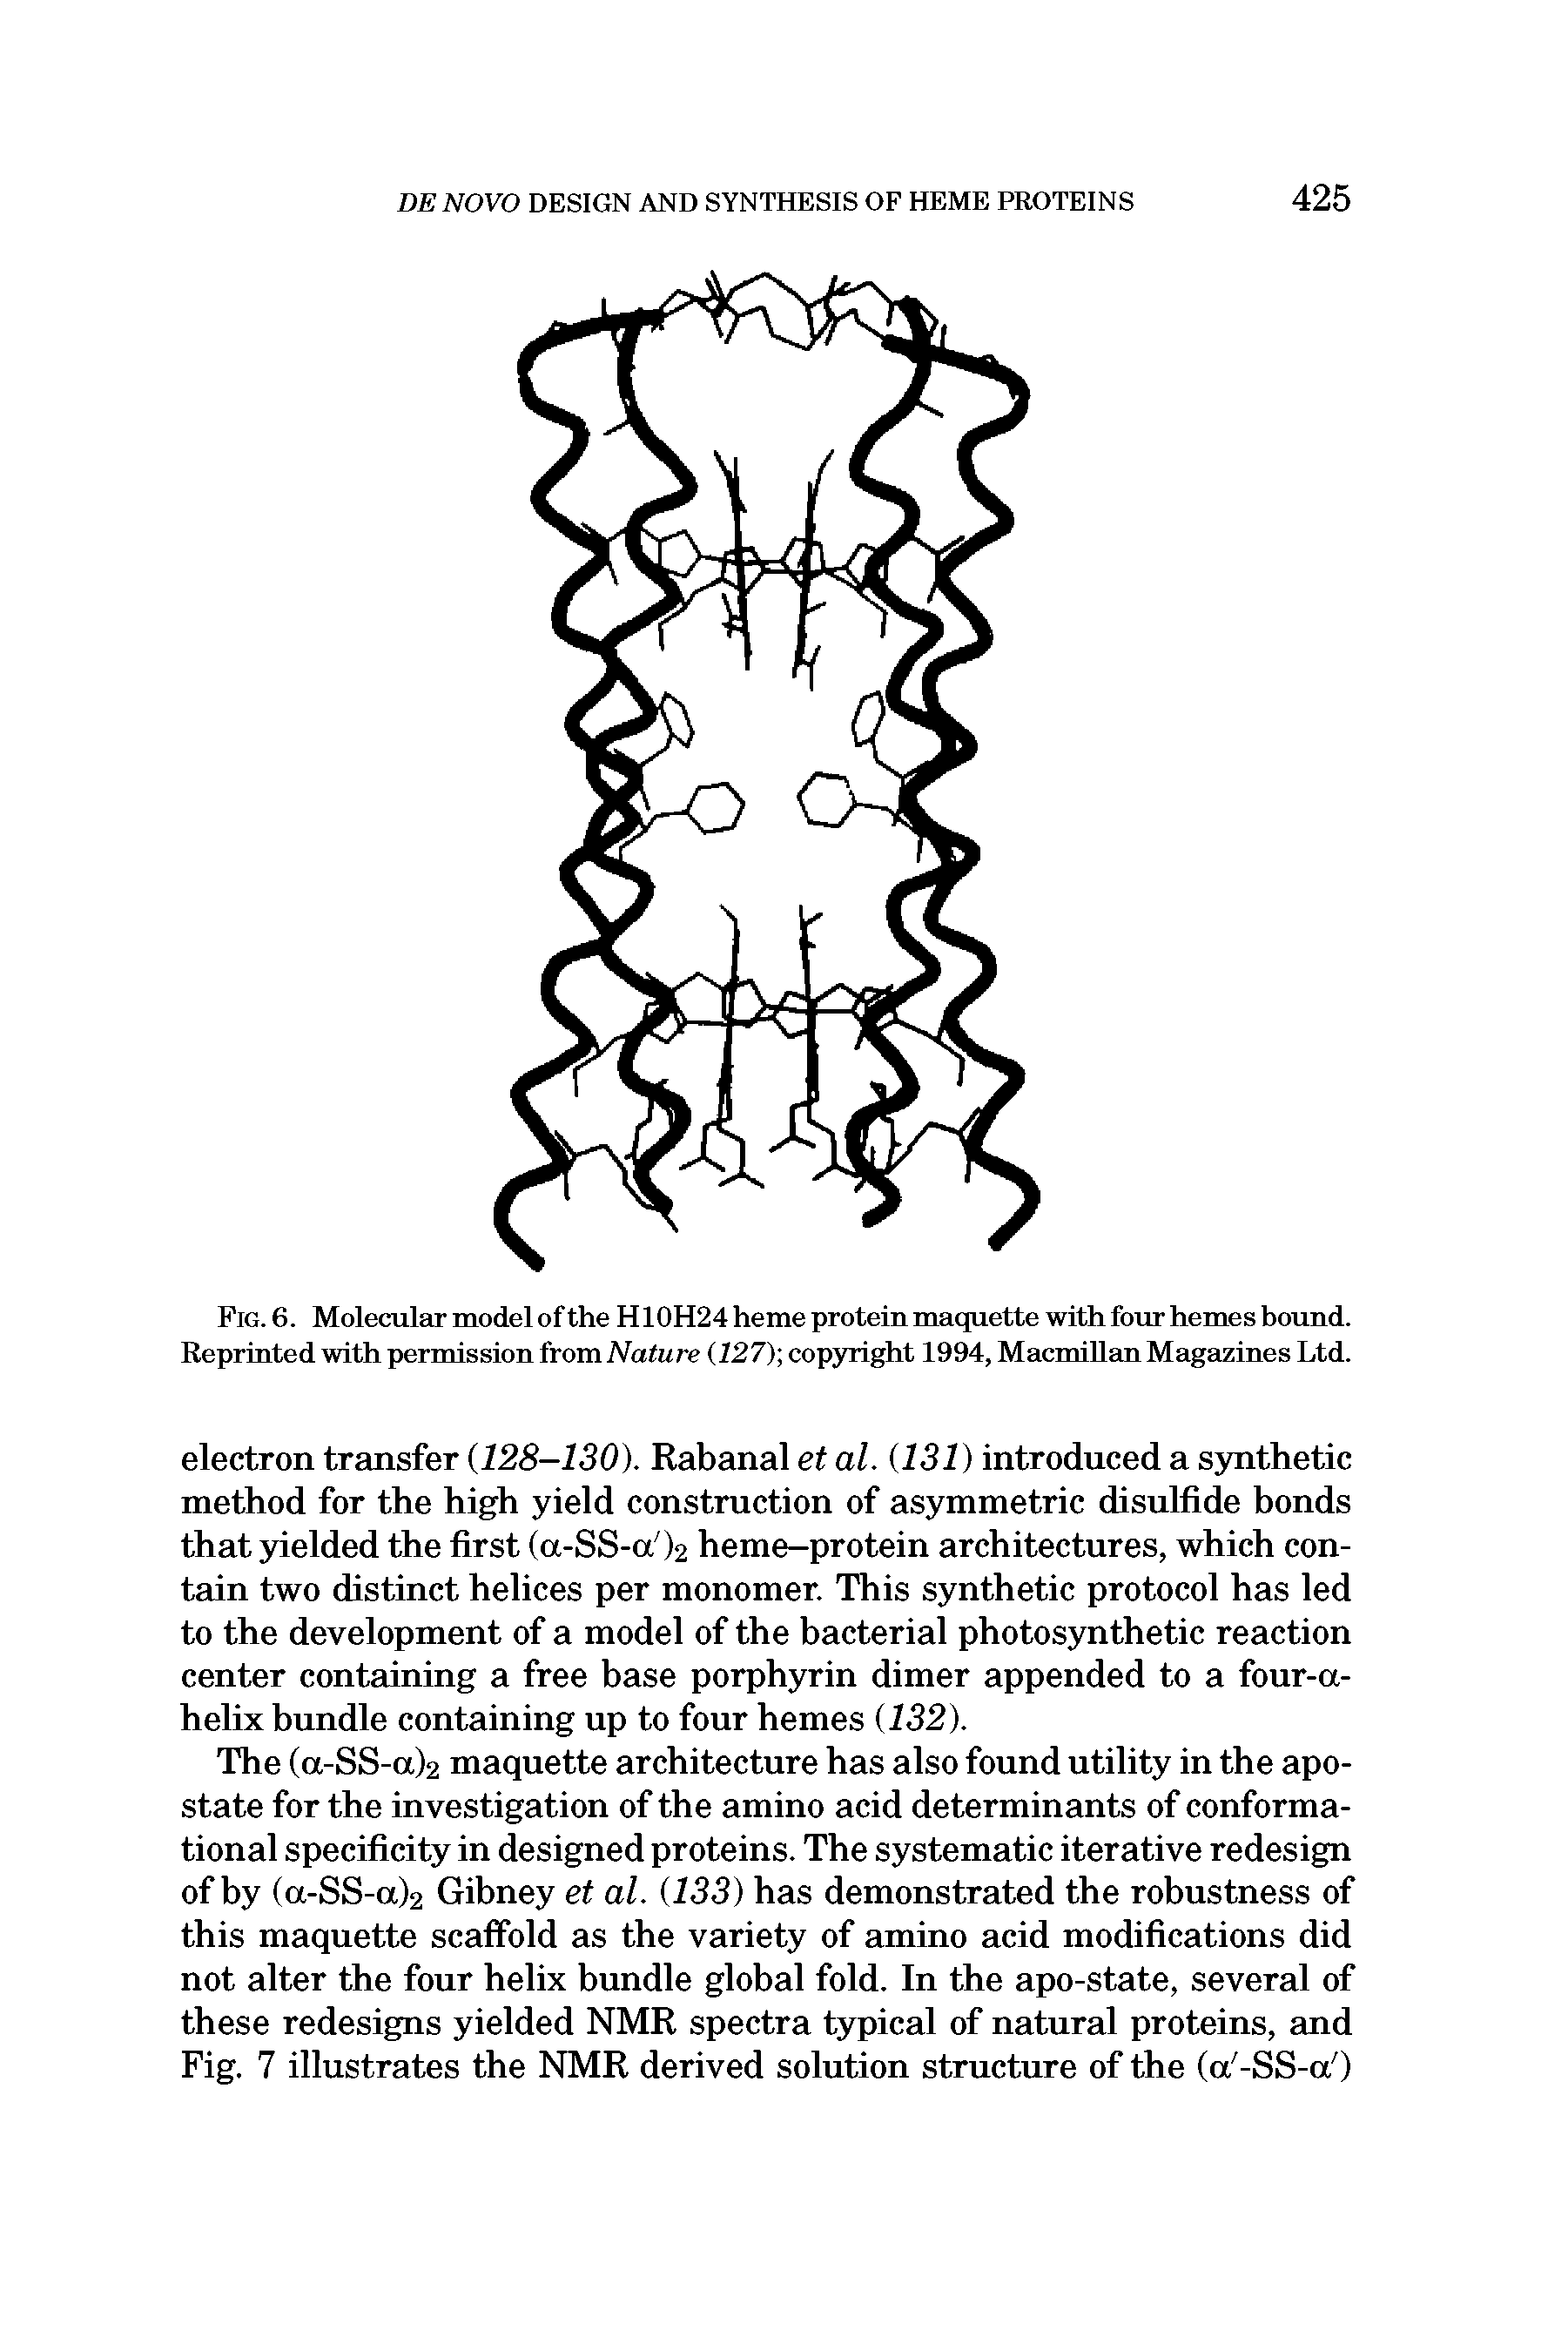 Fig. 6. Molecular model of the H10H24 heme protein maquette with four hemes bound. Reprinted with permission from Nature (127) copyright 1994, Macmillan Magazines Ltd.